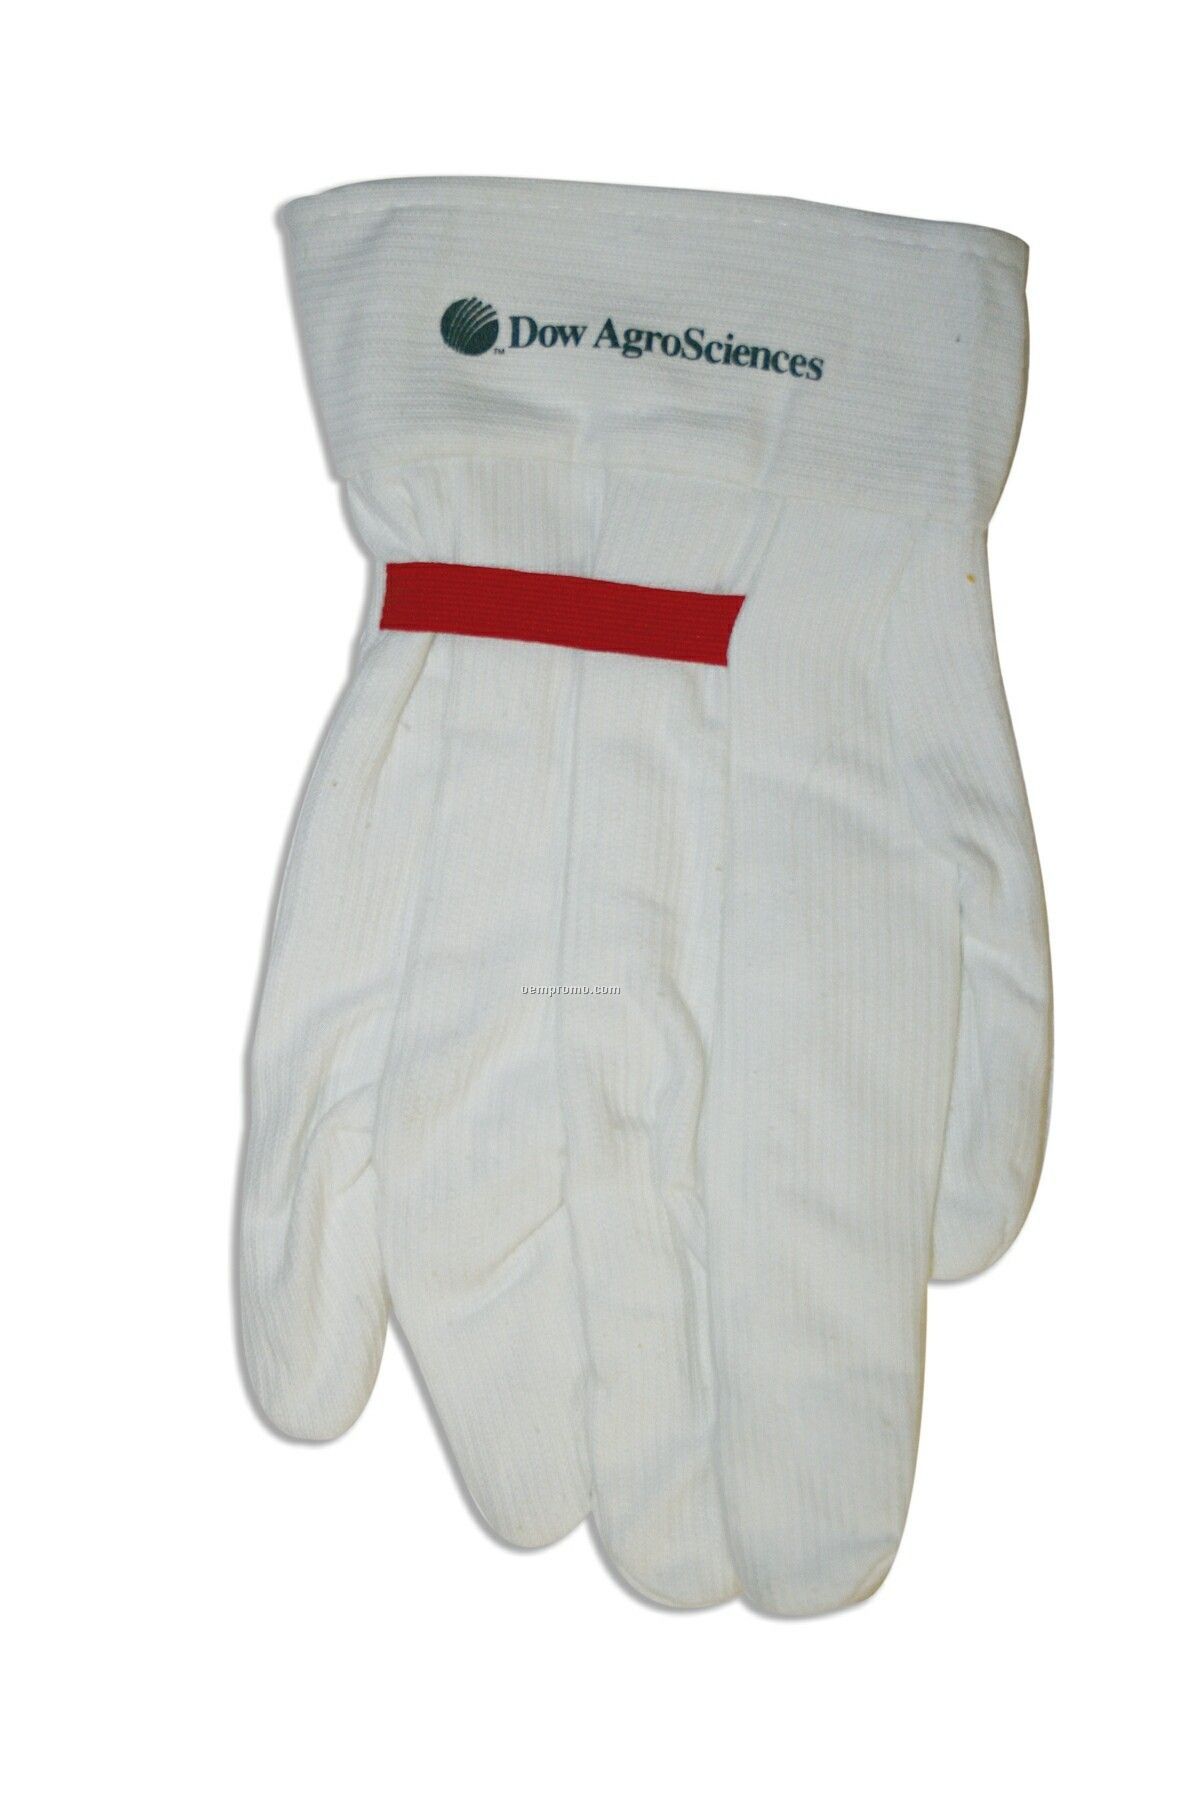 Bleached Corded Glove With Red Elastic Strap